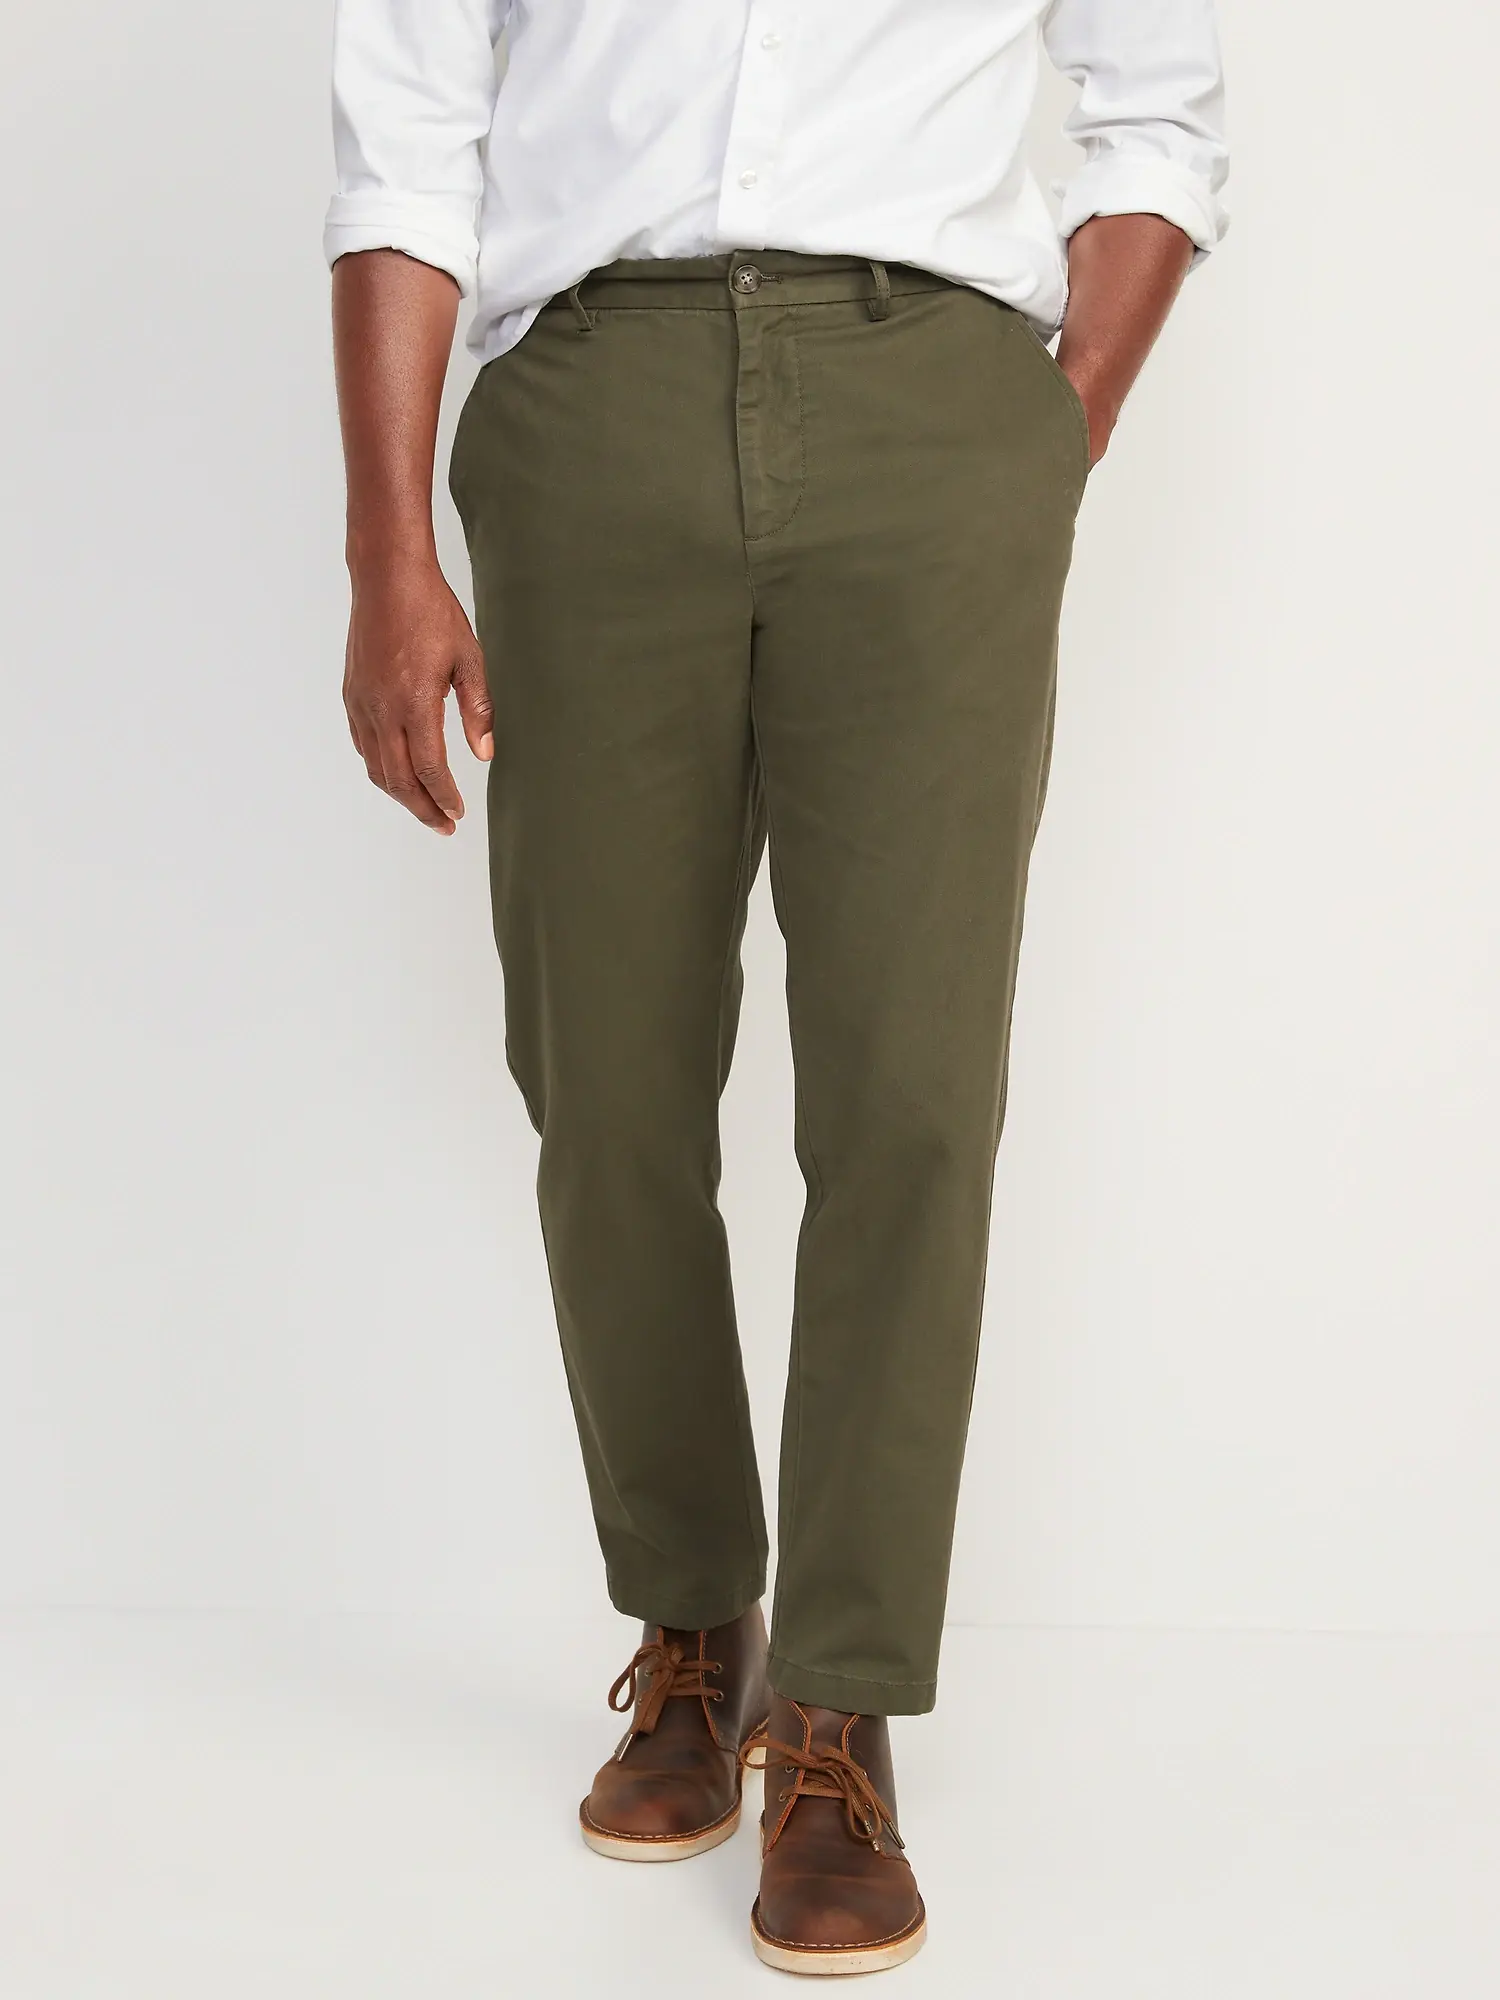 Old Navy Loose Taper Built-In Flex Rotation Ankle-Length Chino Pants for Men green. 1